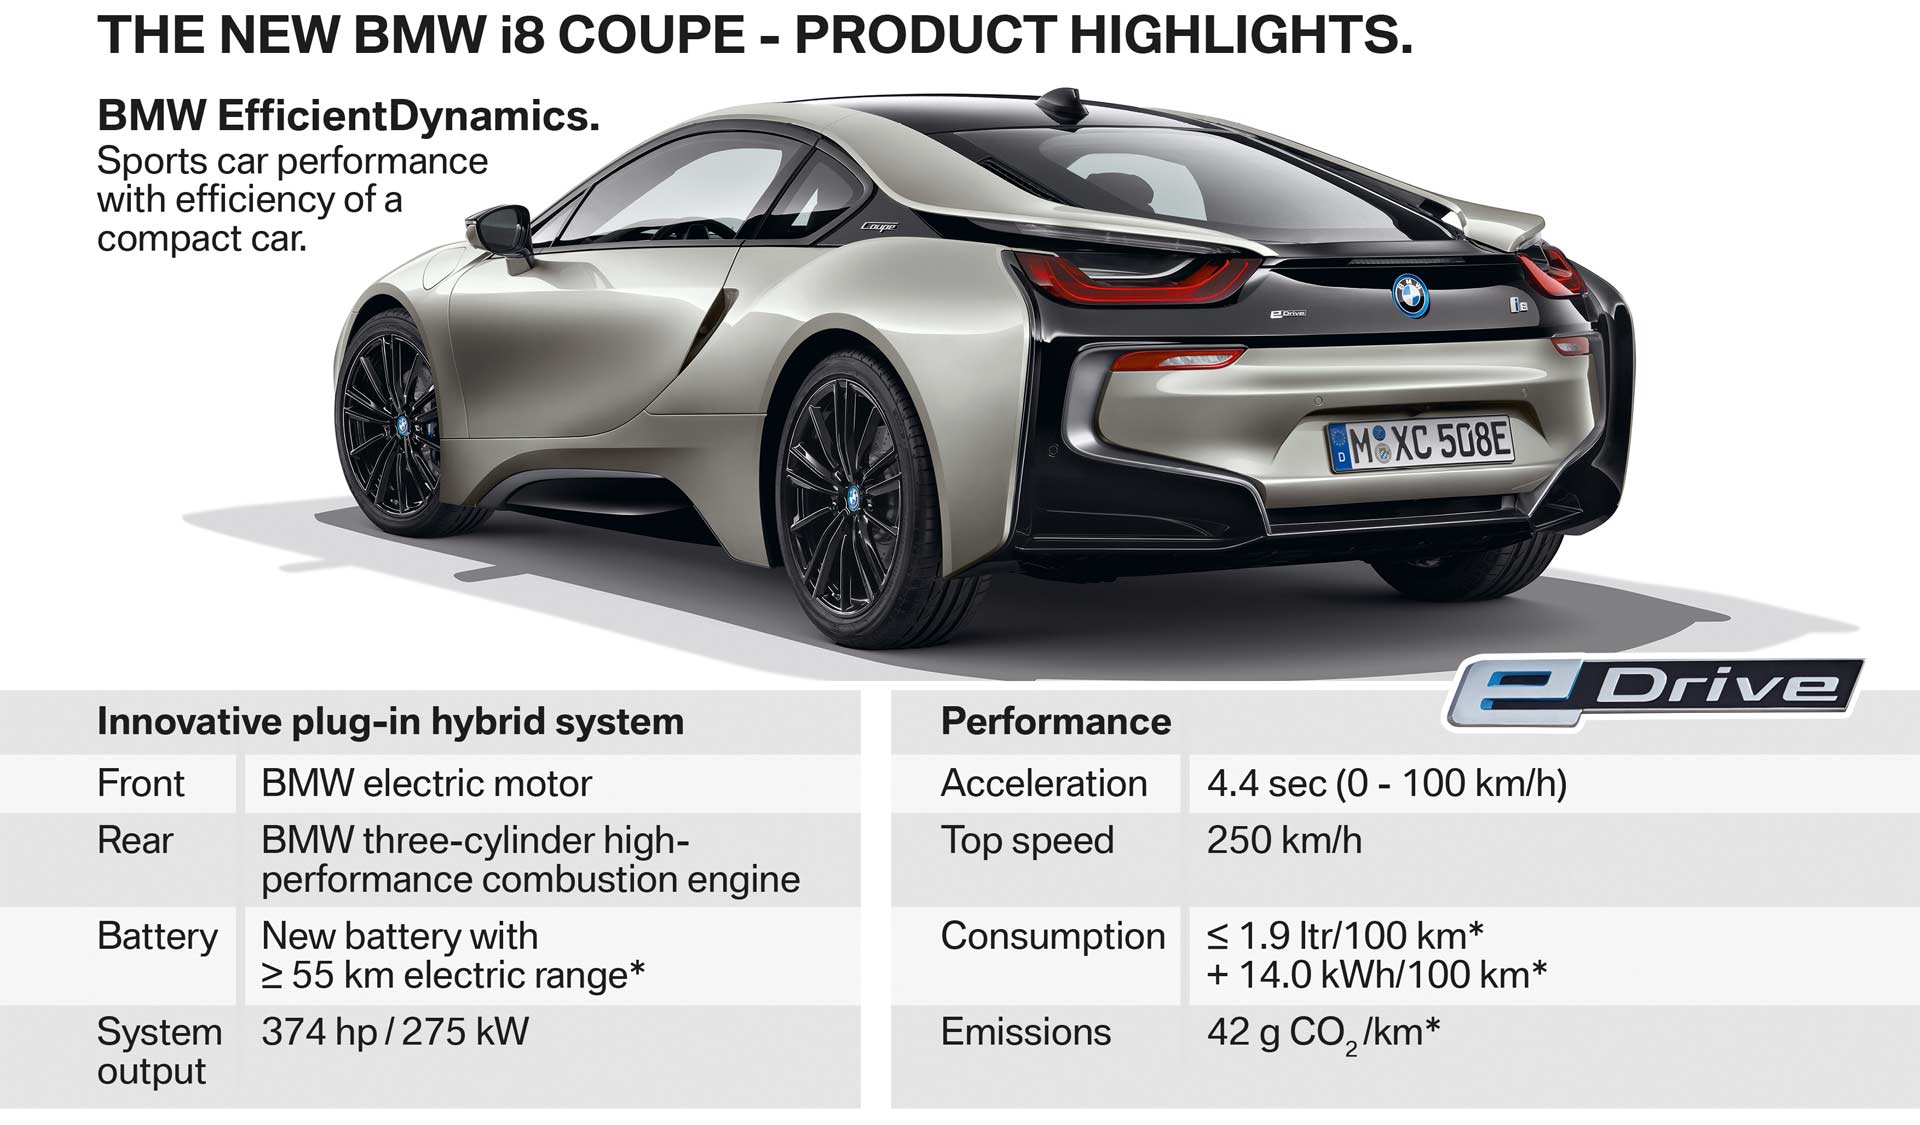 2018-BMW-i8-Coupe-product-highlights_2